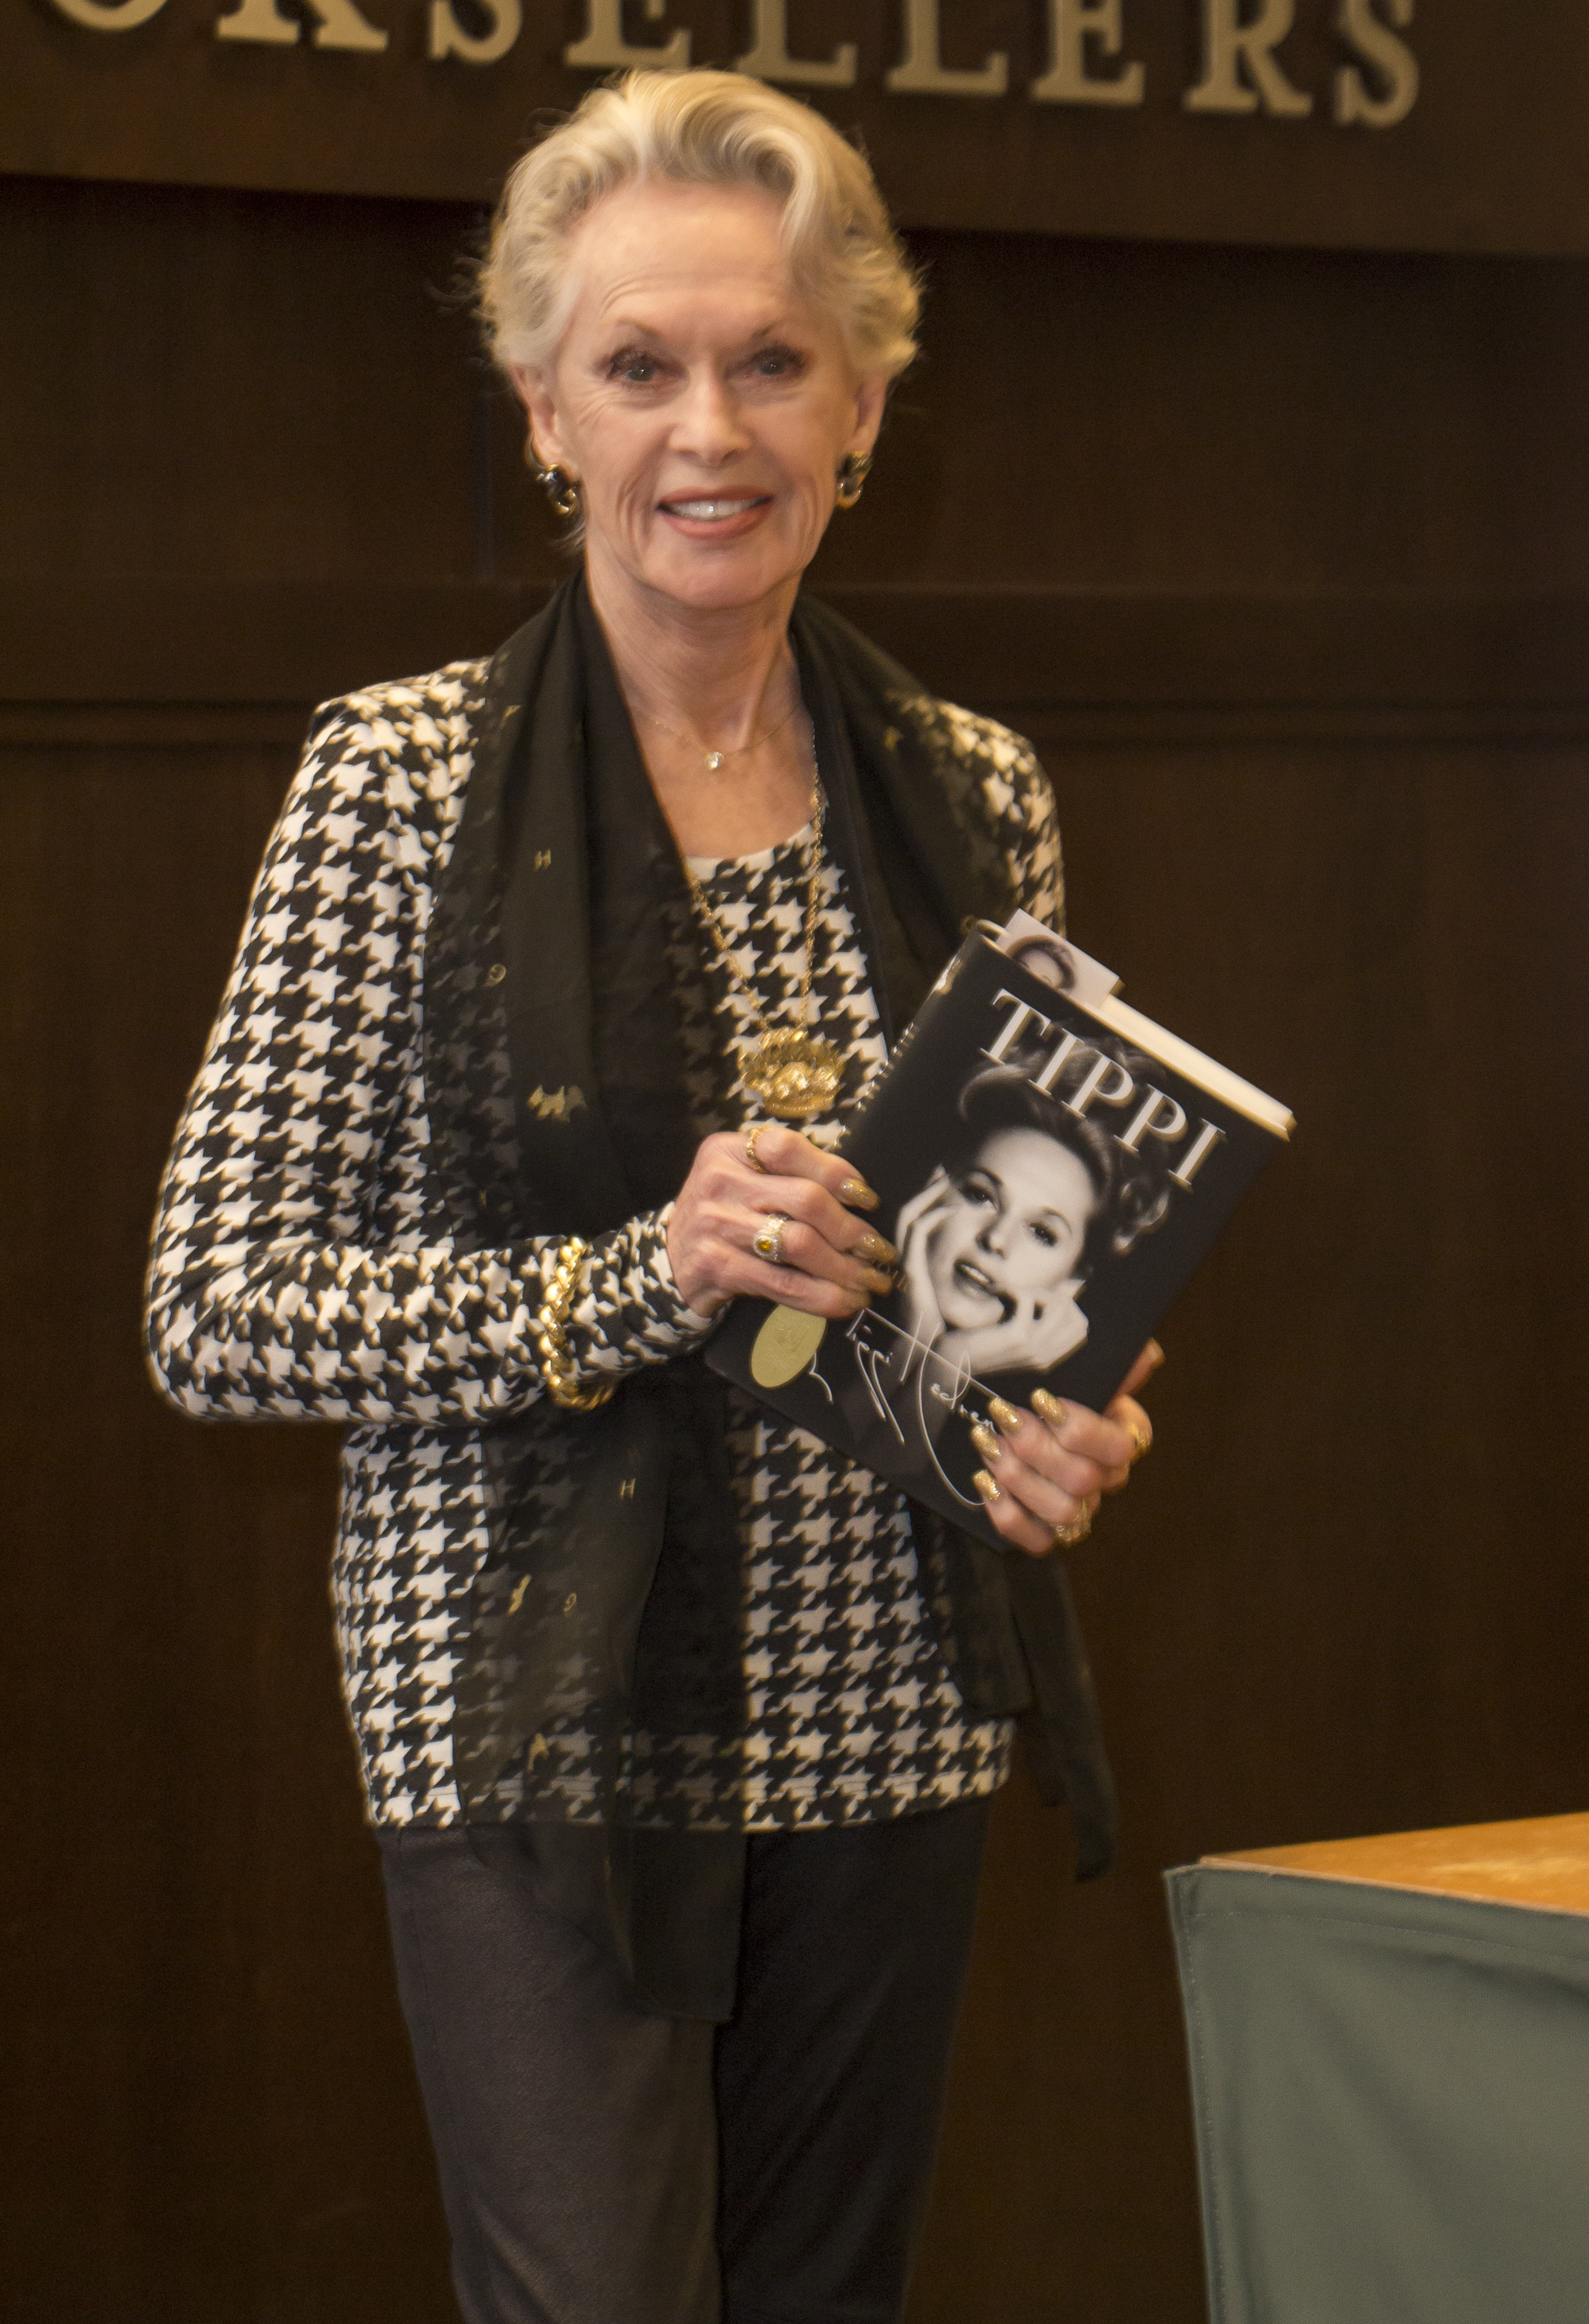 Tippi Hedren poses for portrait at her book signing for "Tippi" at Barnes & Noble in Los Angeles, California, on November 11, 2016. | Source: Getty Images